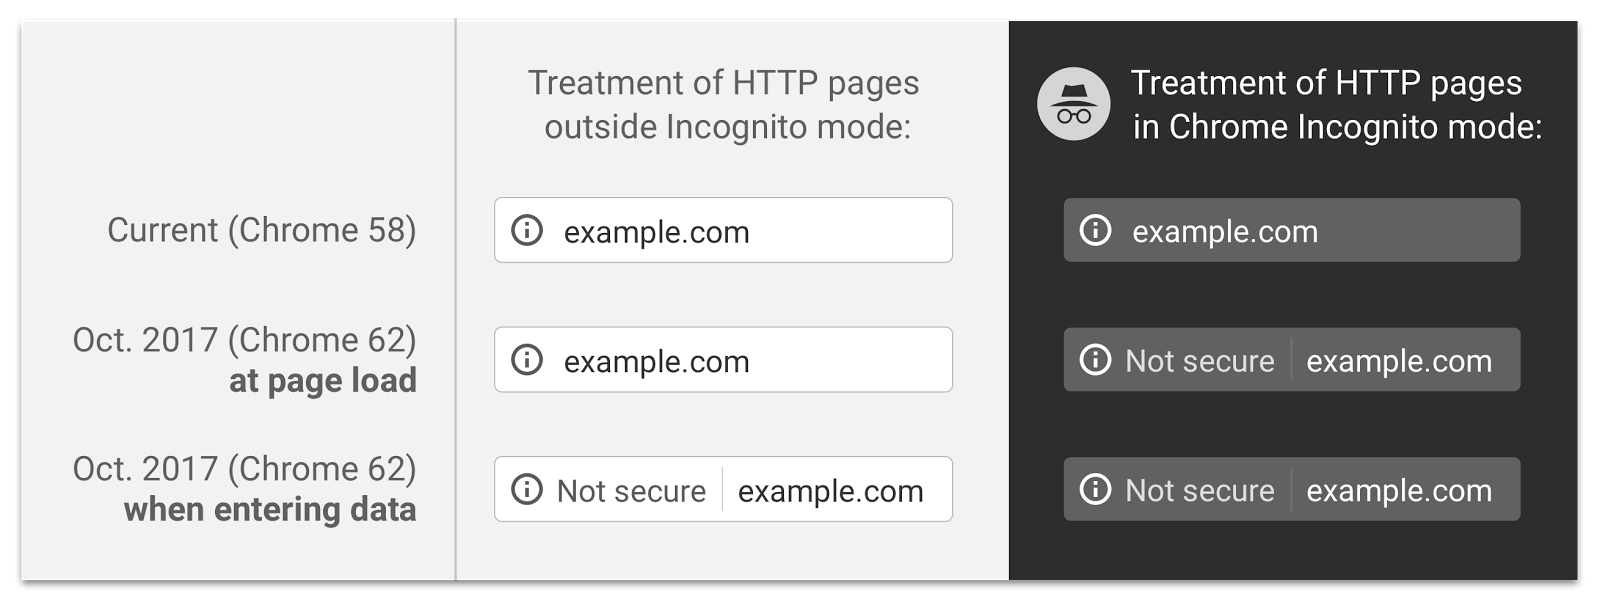 Treatment of HTTP pages in Chrome 62 - Chrome 62 における HTTP ページでの表示例